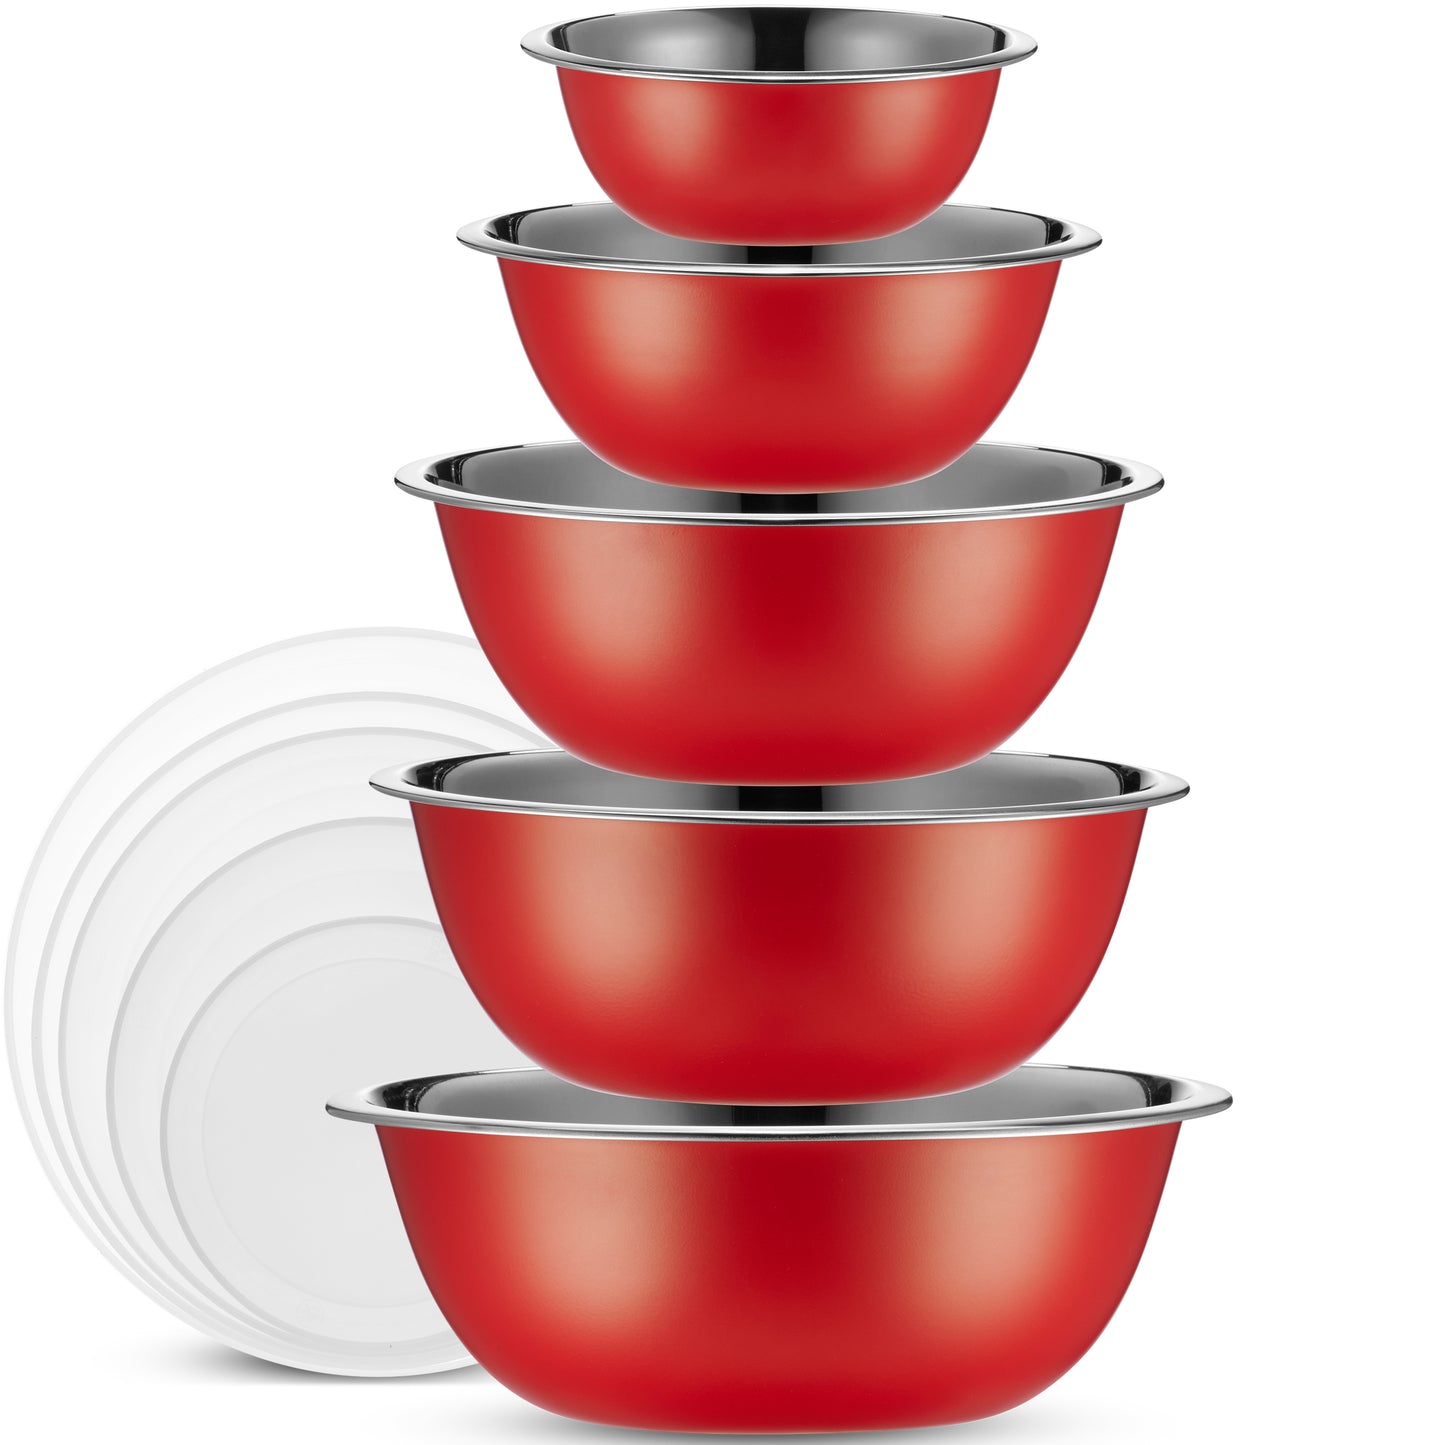 Stainless Steel Mixing Bowls With Lids Set, Red